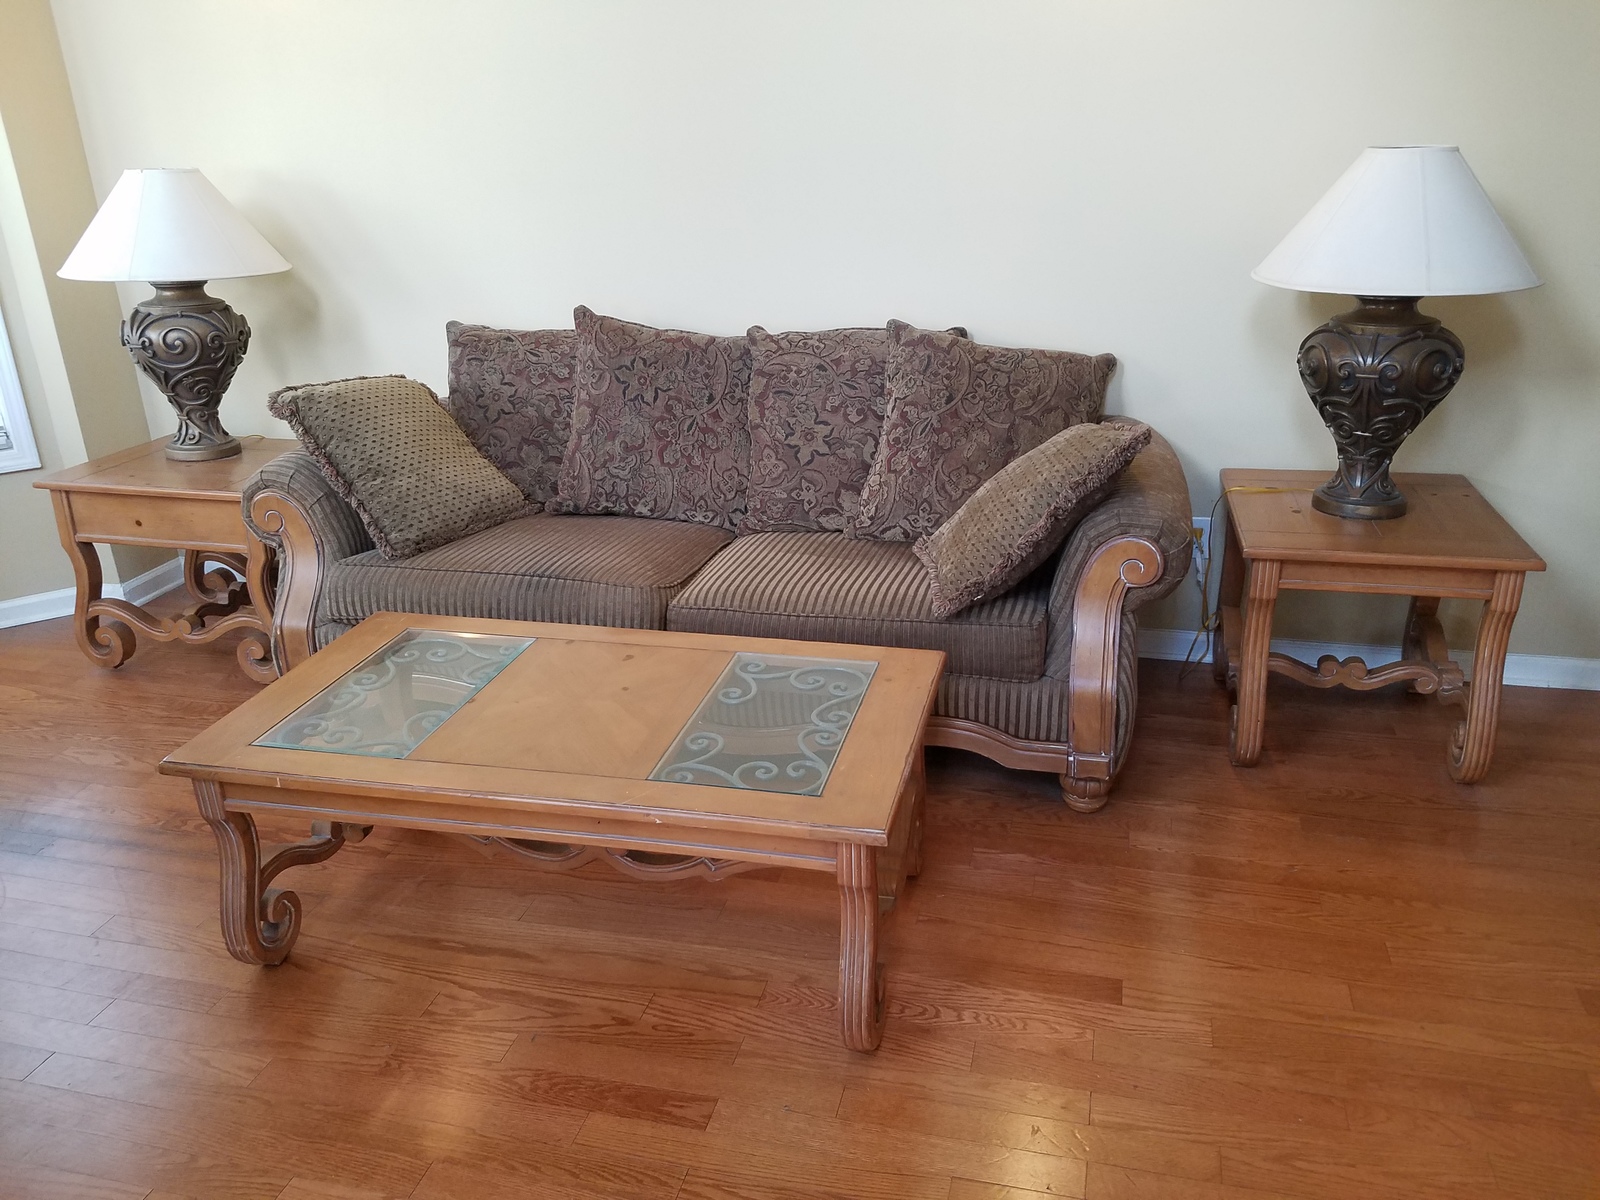 LIVING ROOM FURNITURE: VERY COMFORTABLE SOFA IN EXCELLENT CONDITION WITH A COFFE - $999.00